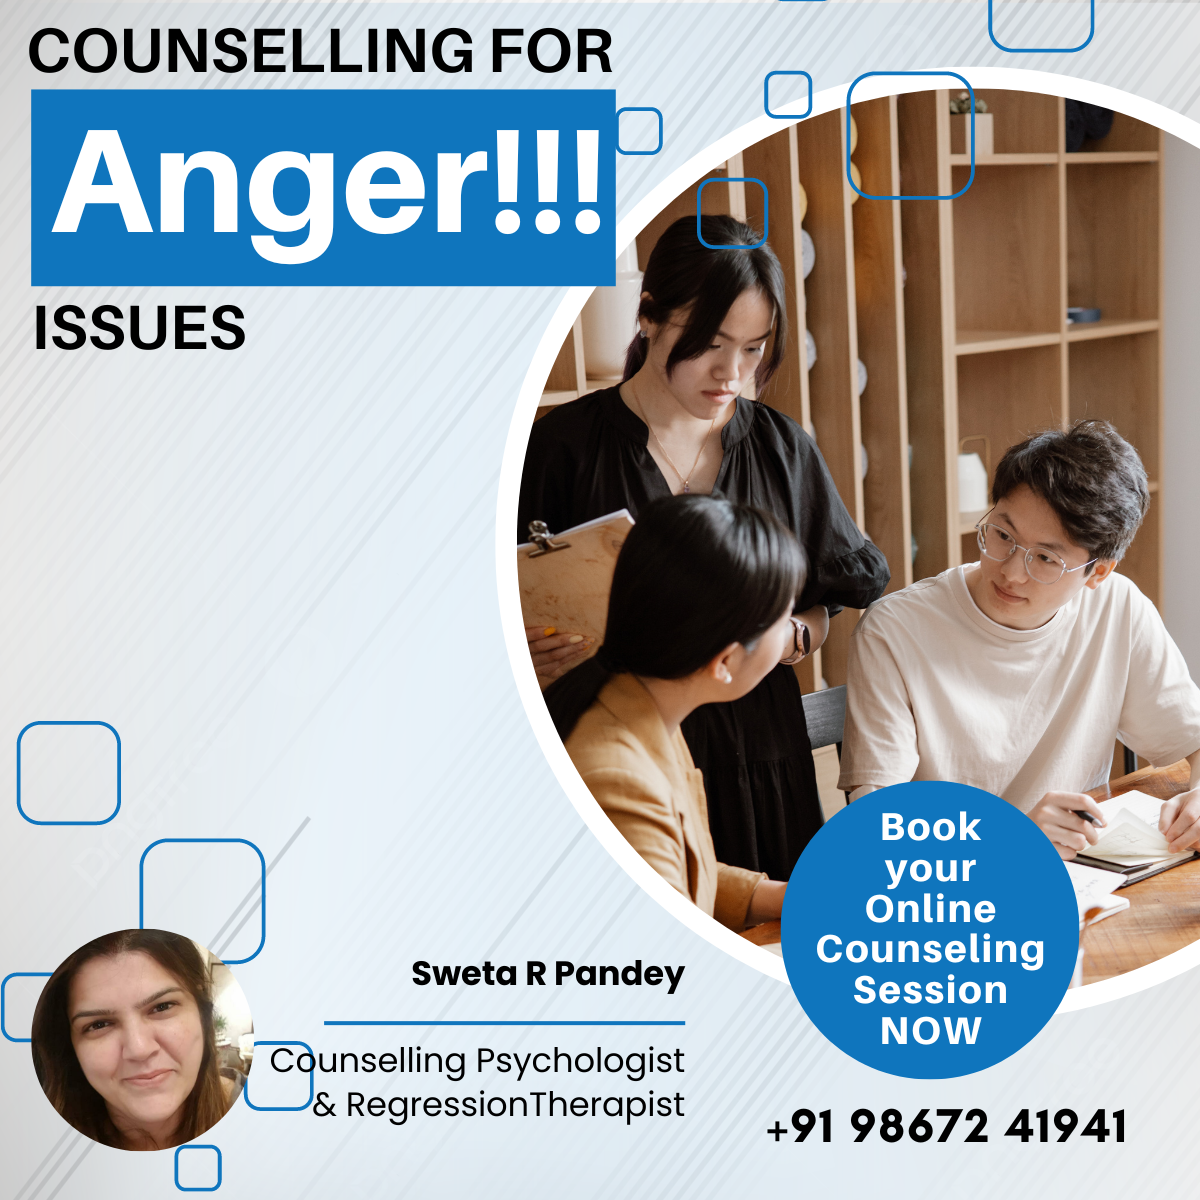 Counselling for Anger Issues - Sweta R Pandey - Jamshedpur